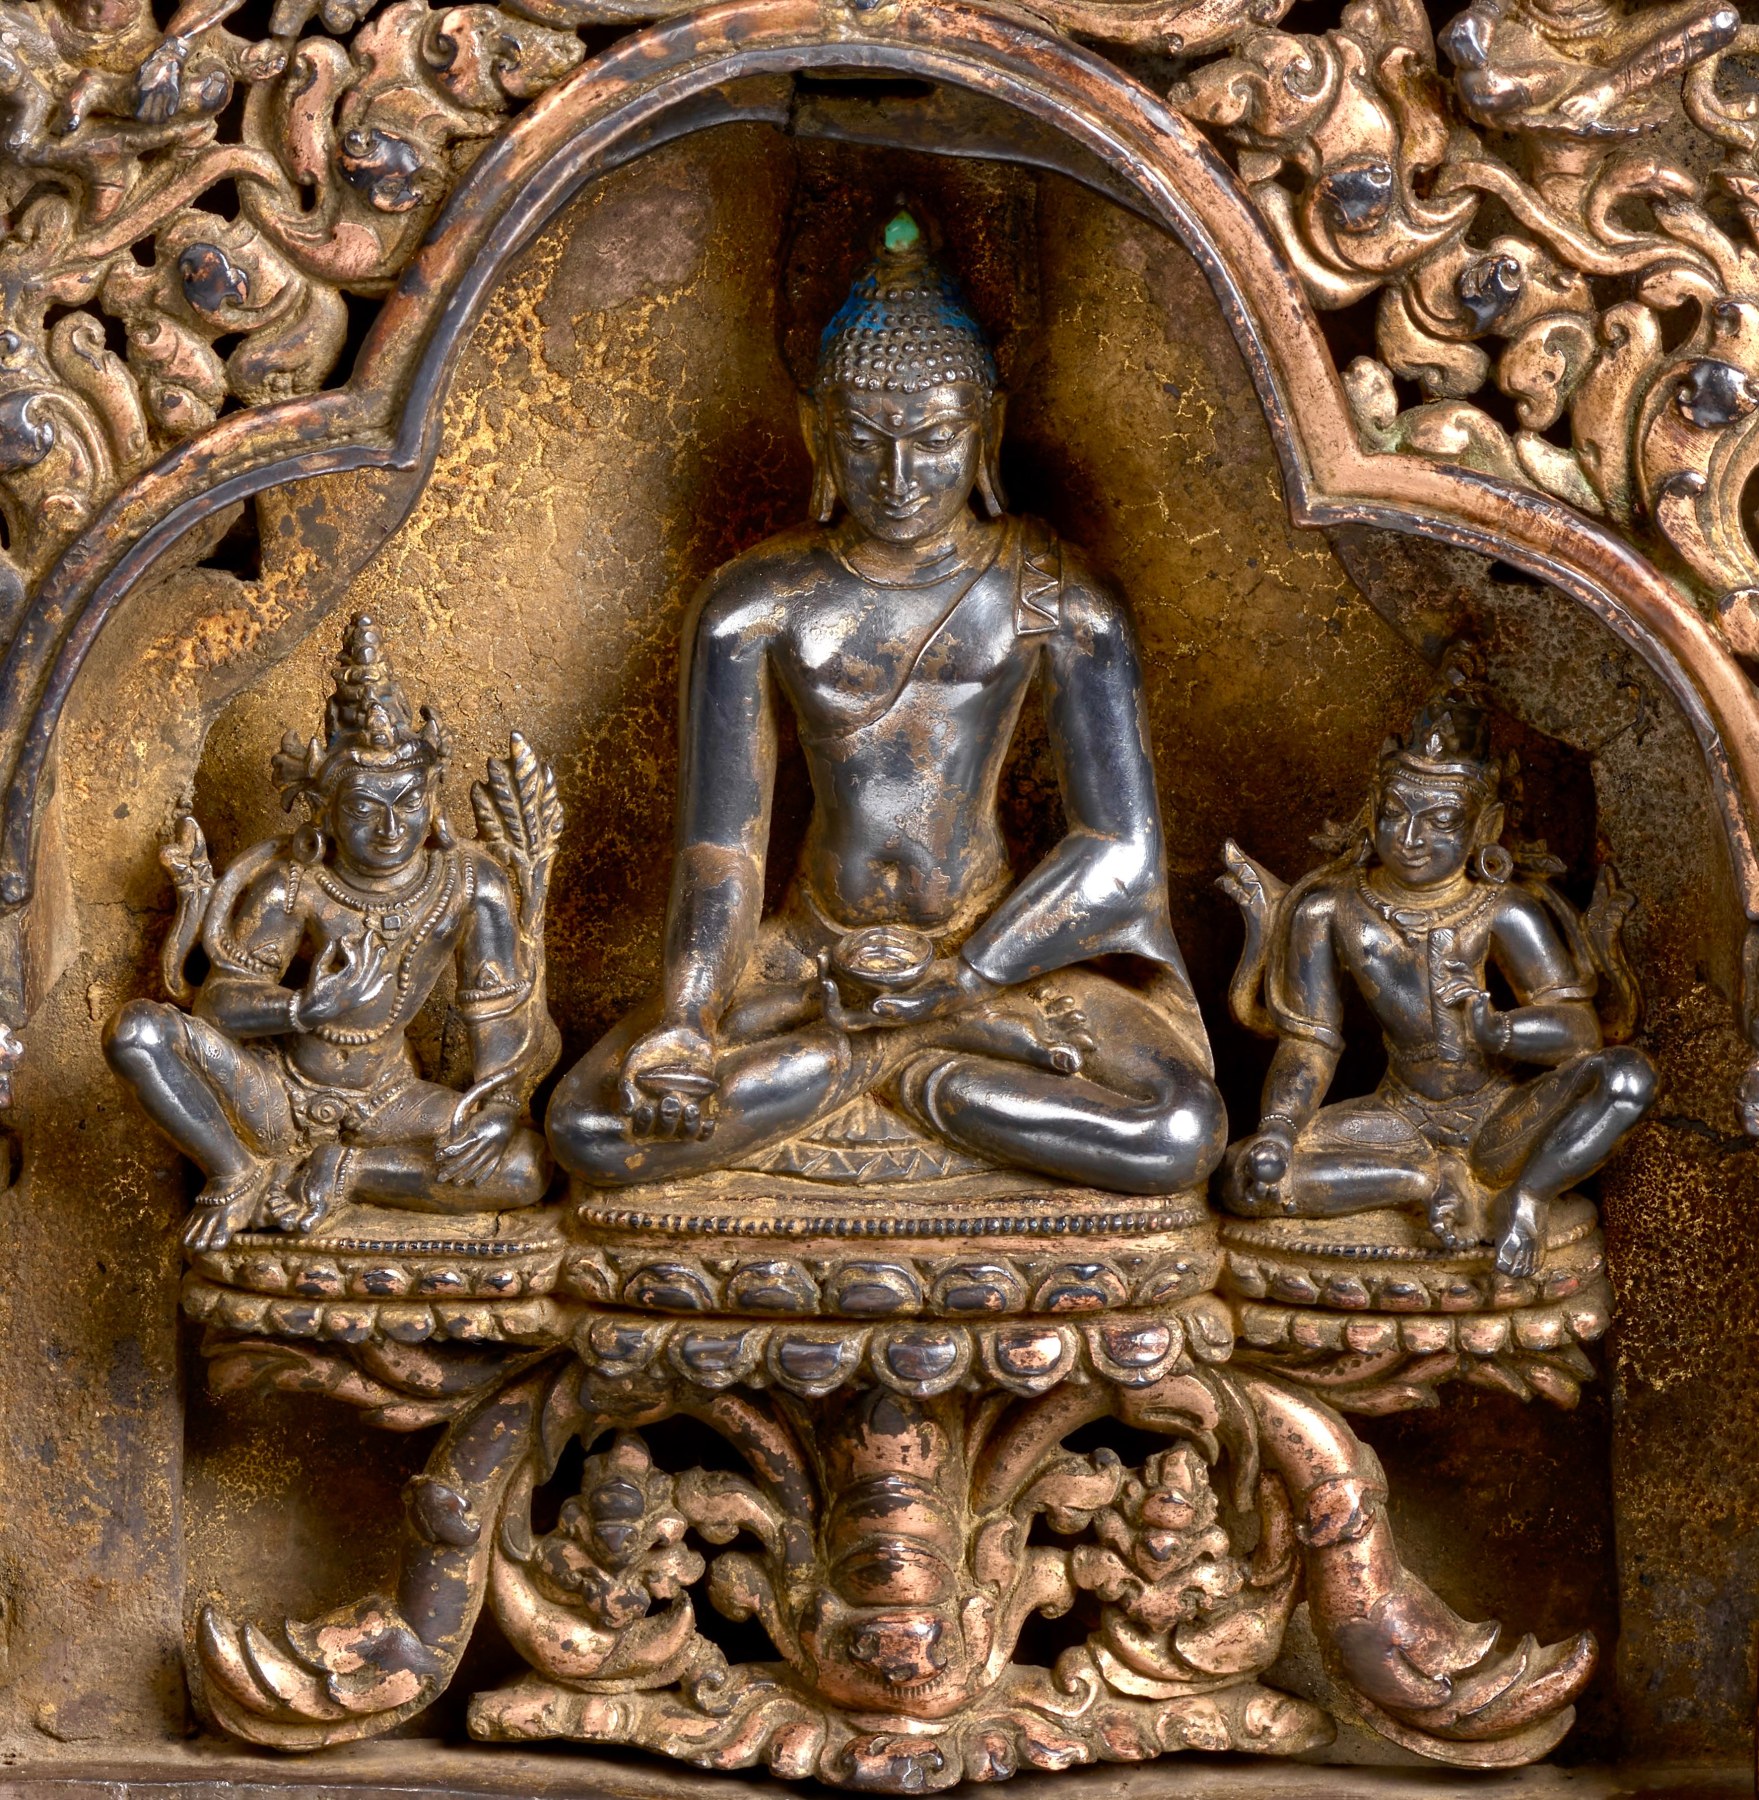 Fourth detail of This plinth from an important eastern Indian stupa is assembled from four separately-cast gilt-copper arches (torana) with crouching elephants, rampant leogryphs, and jewel-topped pillars supporting trilobate spans, makara at either end of the crossbars, bodhisattvas and celestial figures above, and with kirtimukha at the apex.  